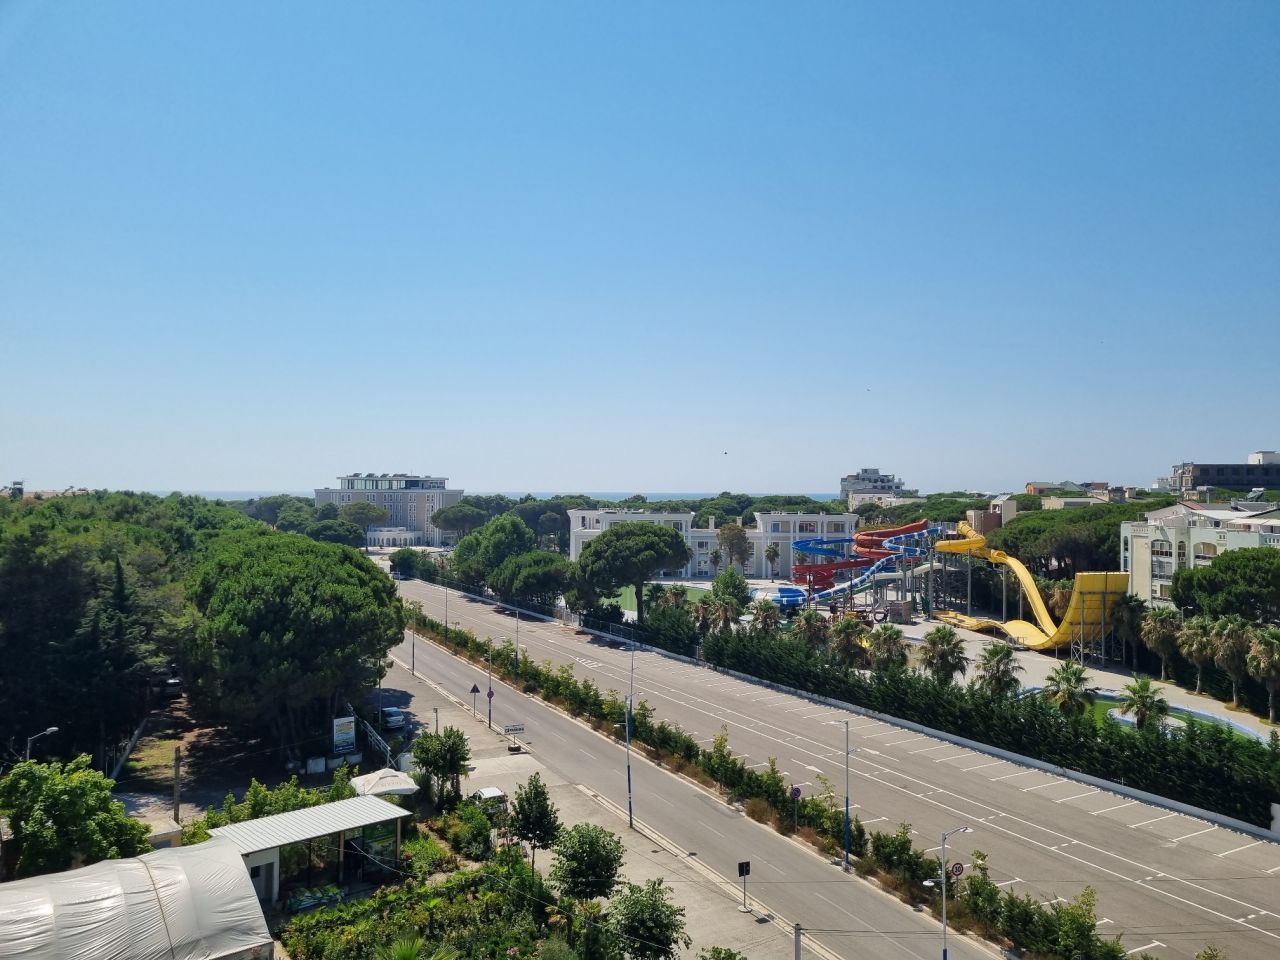 Apartment  For Sale In Mali Robit Golem Durres Albania, Located In A Quiet Area Near The Beach